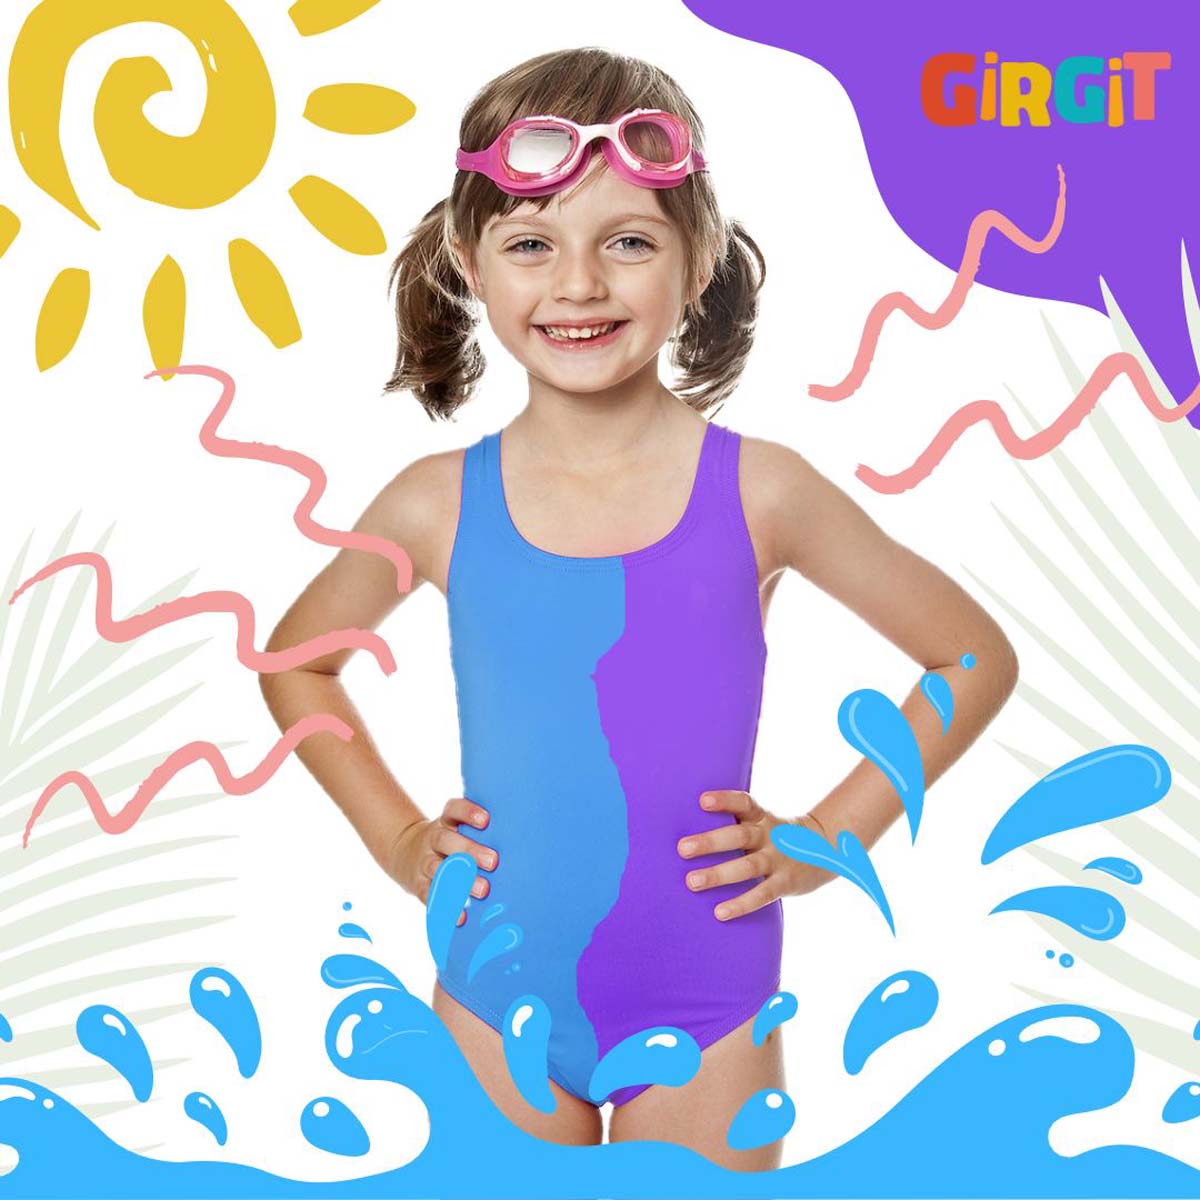 Goodluck Swimming Costume For Kids, Girls - Buy Goodluck Swimming Costume  For Kids, Girls Online at Low Price - Snapdeal